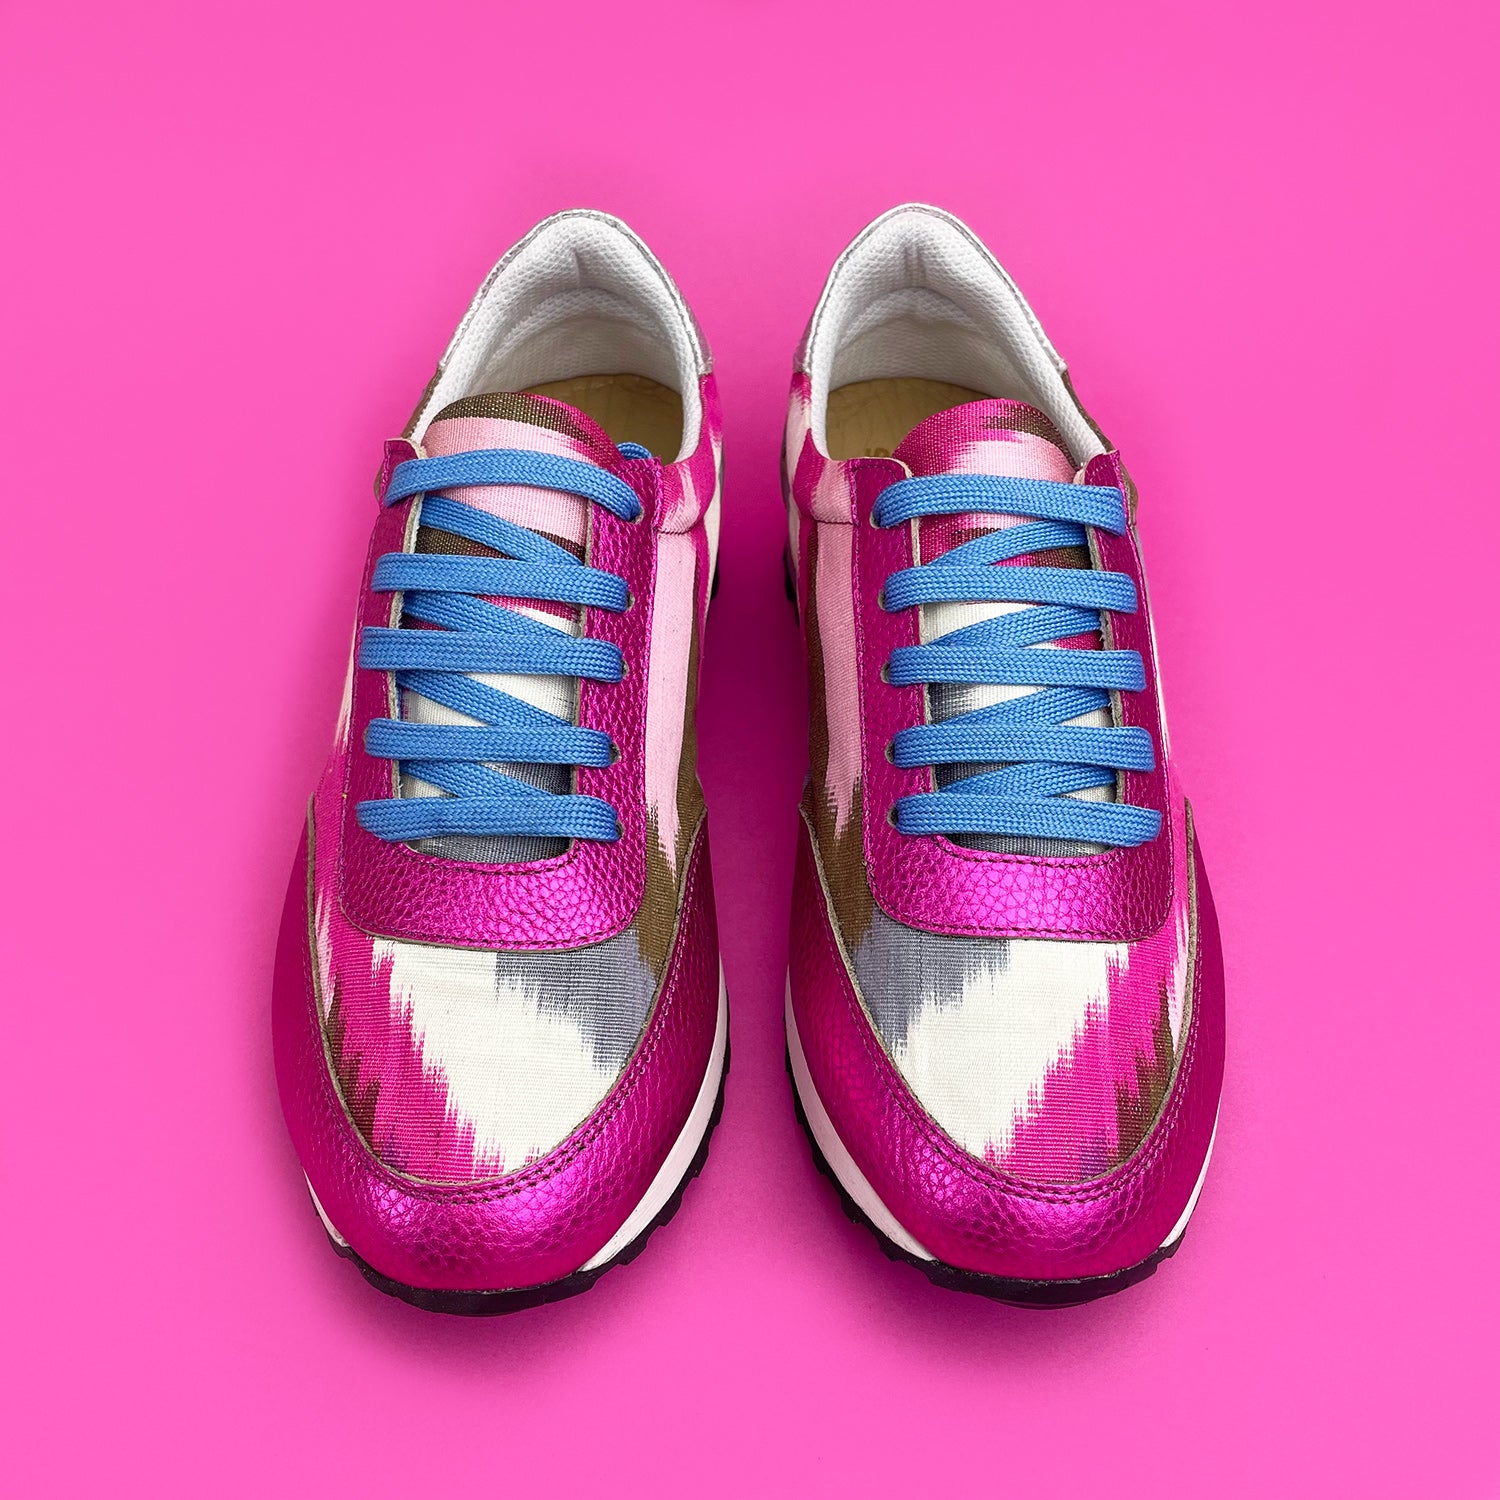 Pink, white, grey and green Ikat Silk trainers with pink metallic leather and blue shoelaces